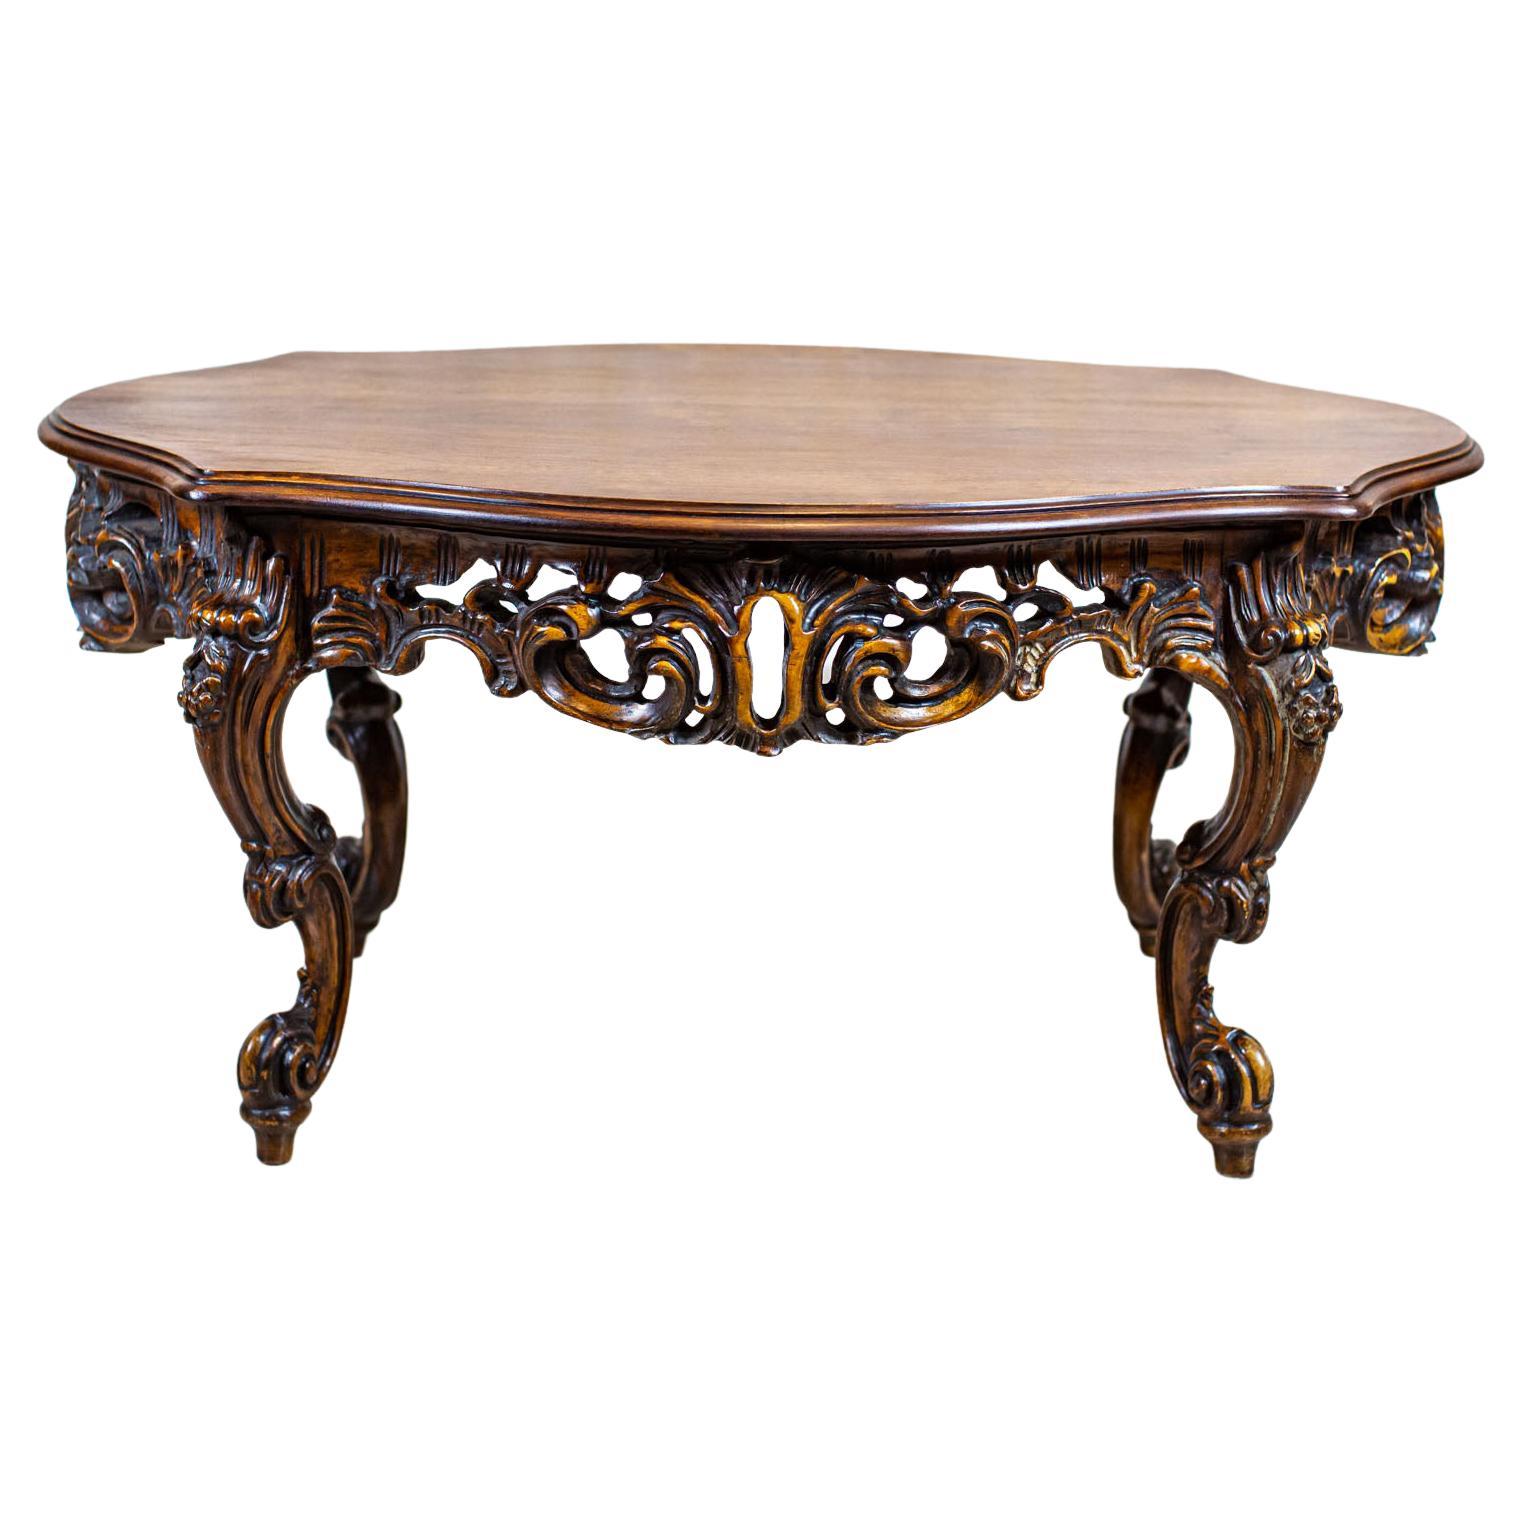 Decorative Brown Coffee Table from the Mid 20th-Century with Carved Apron